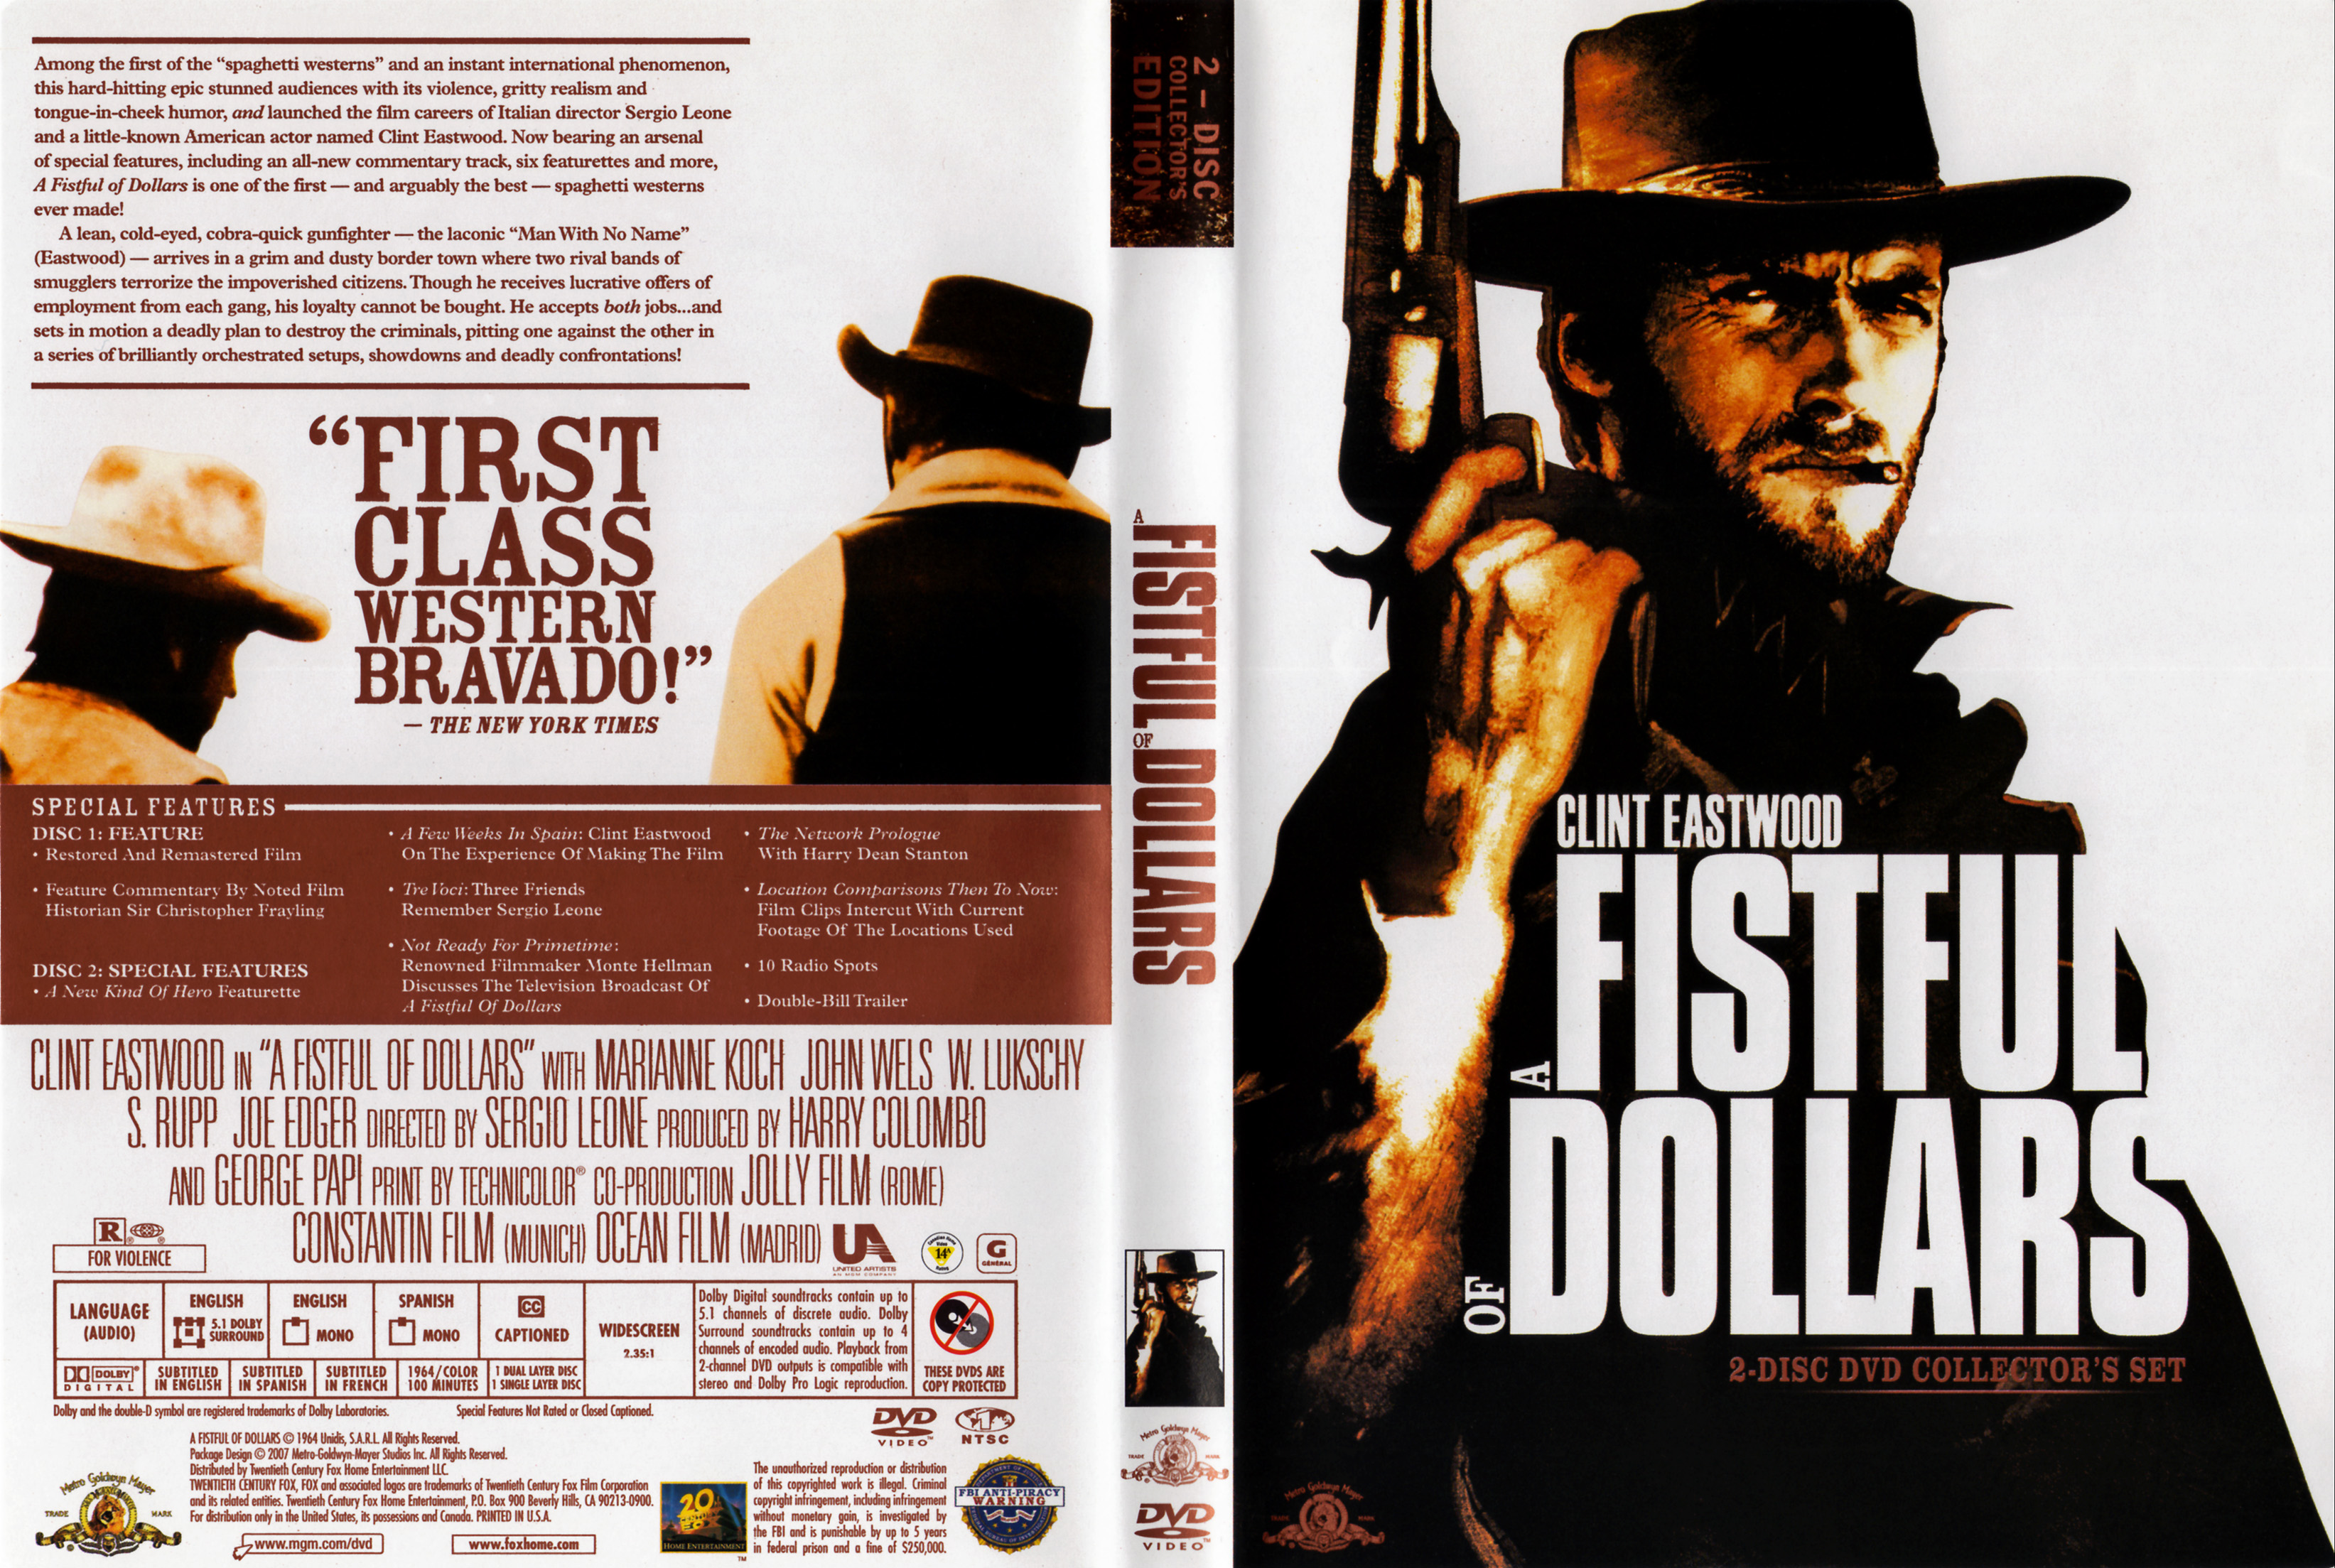 Jaquette DVD A fistful of dollars Zone 1